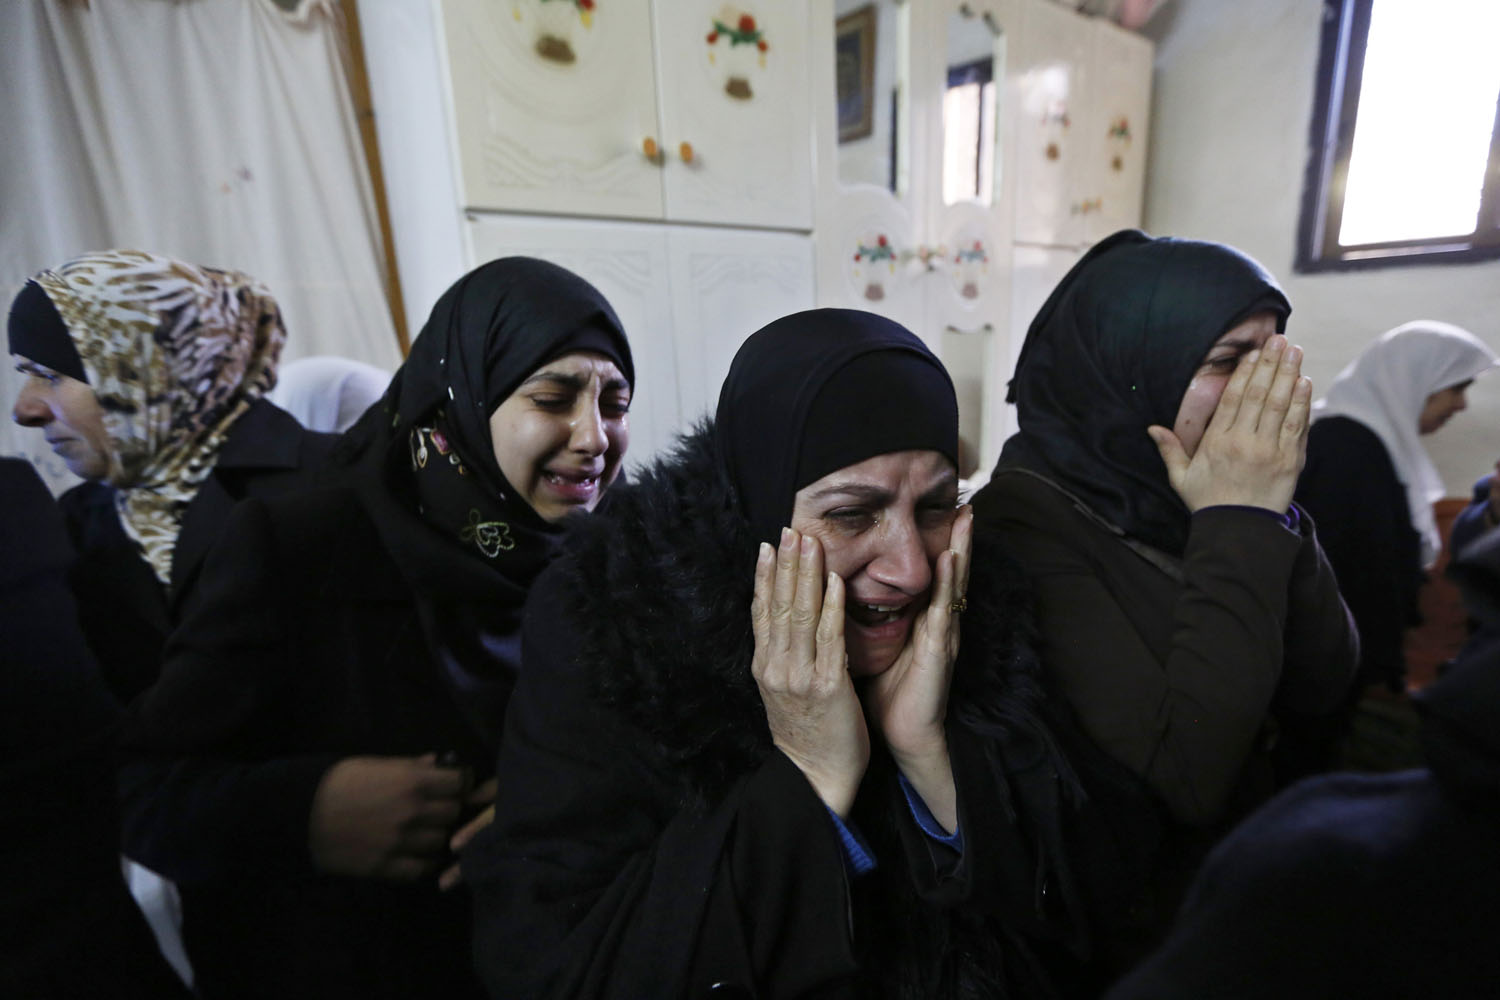 Relatives mourn before the funeral of Palestinian Ali, near Nablus